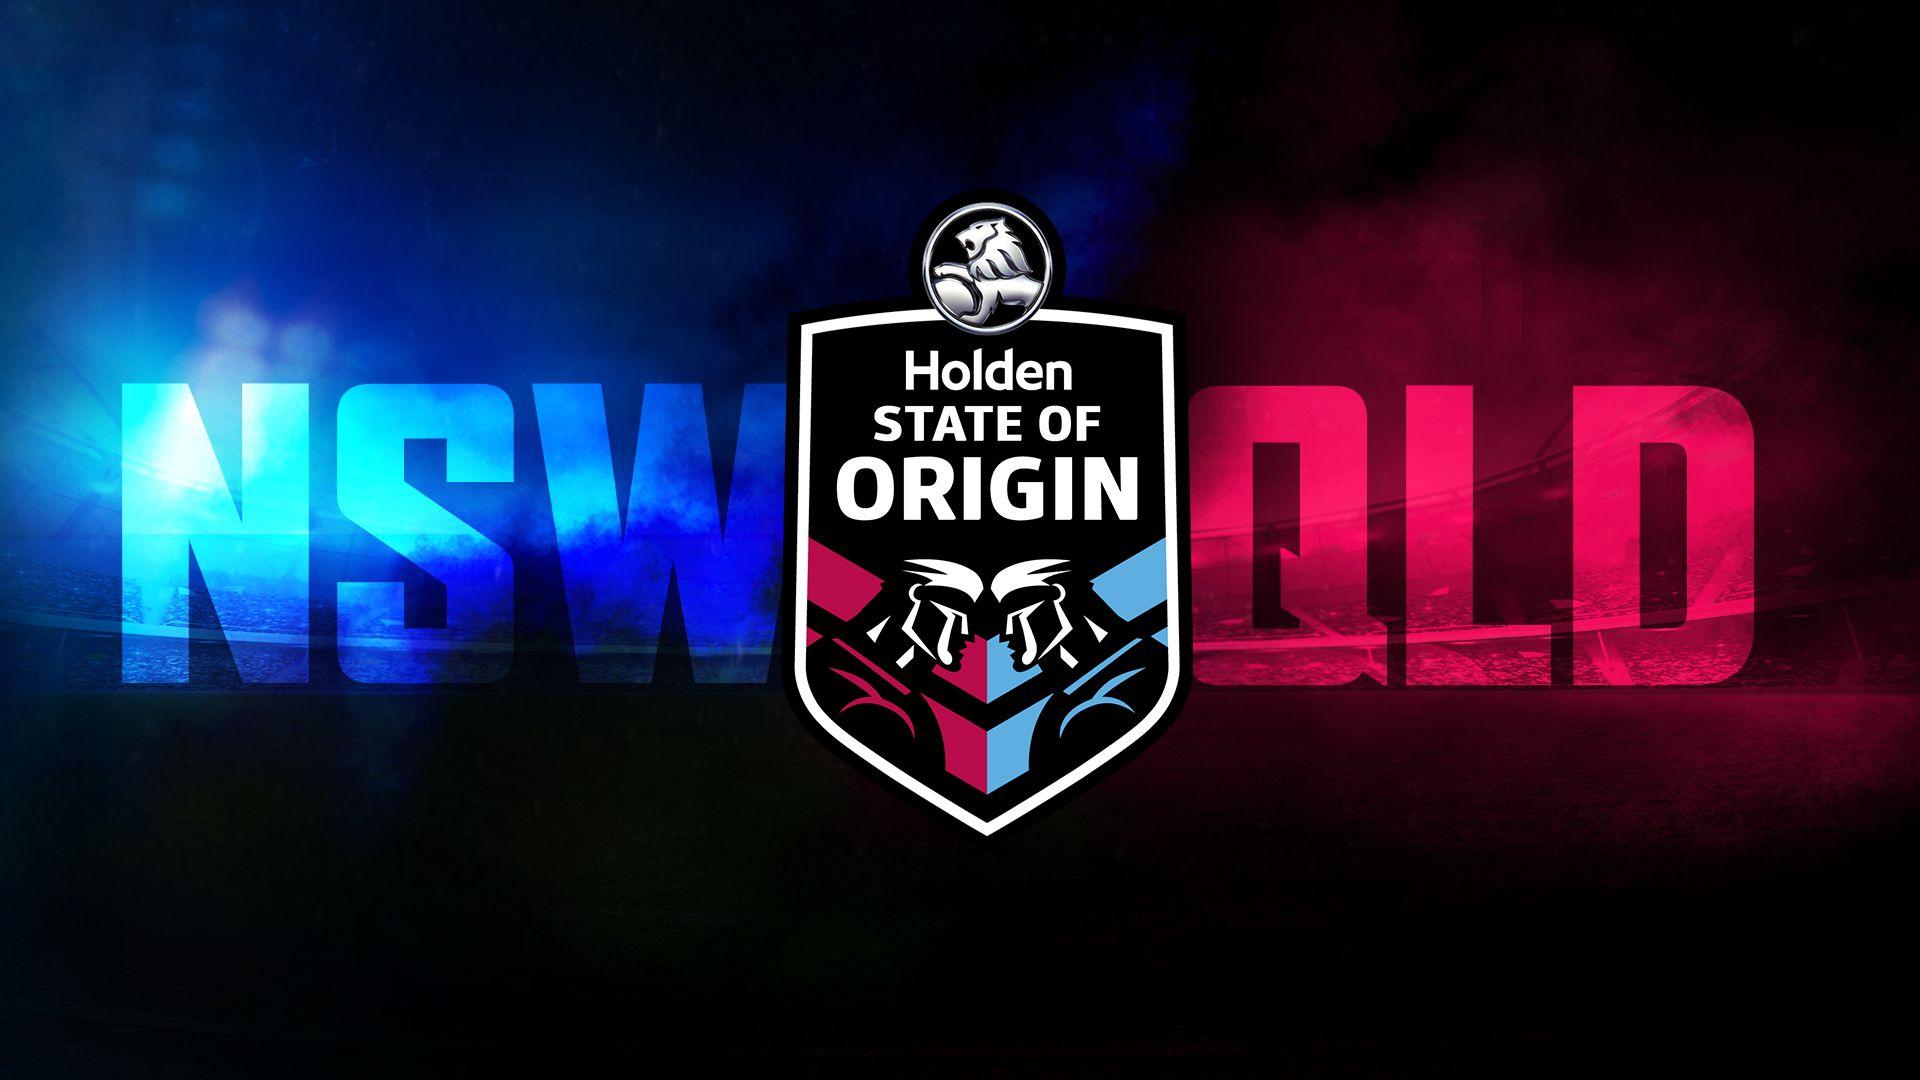 State of Origin Wallpapers Top Free State of Origin Backgrounds